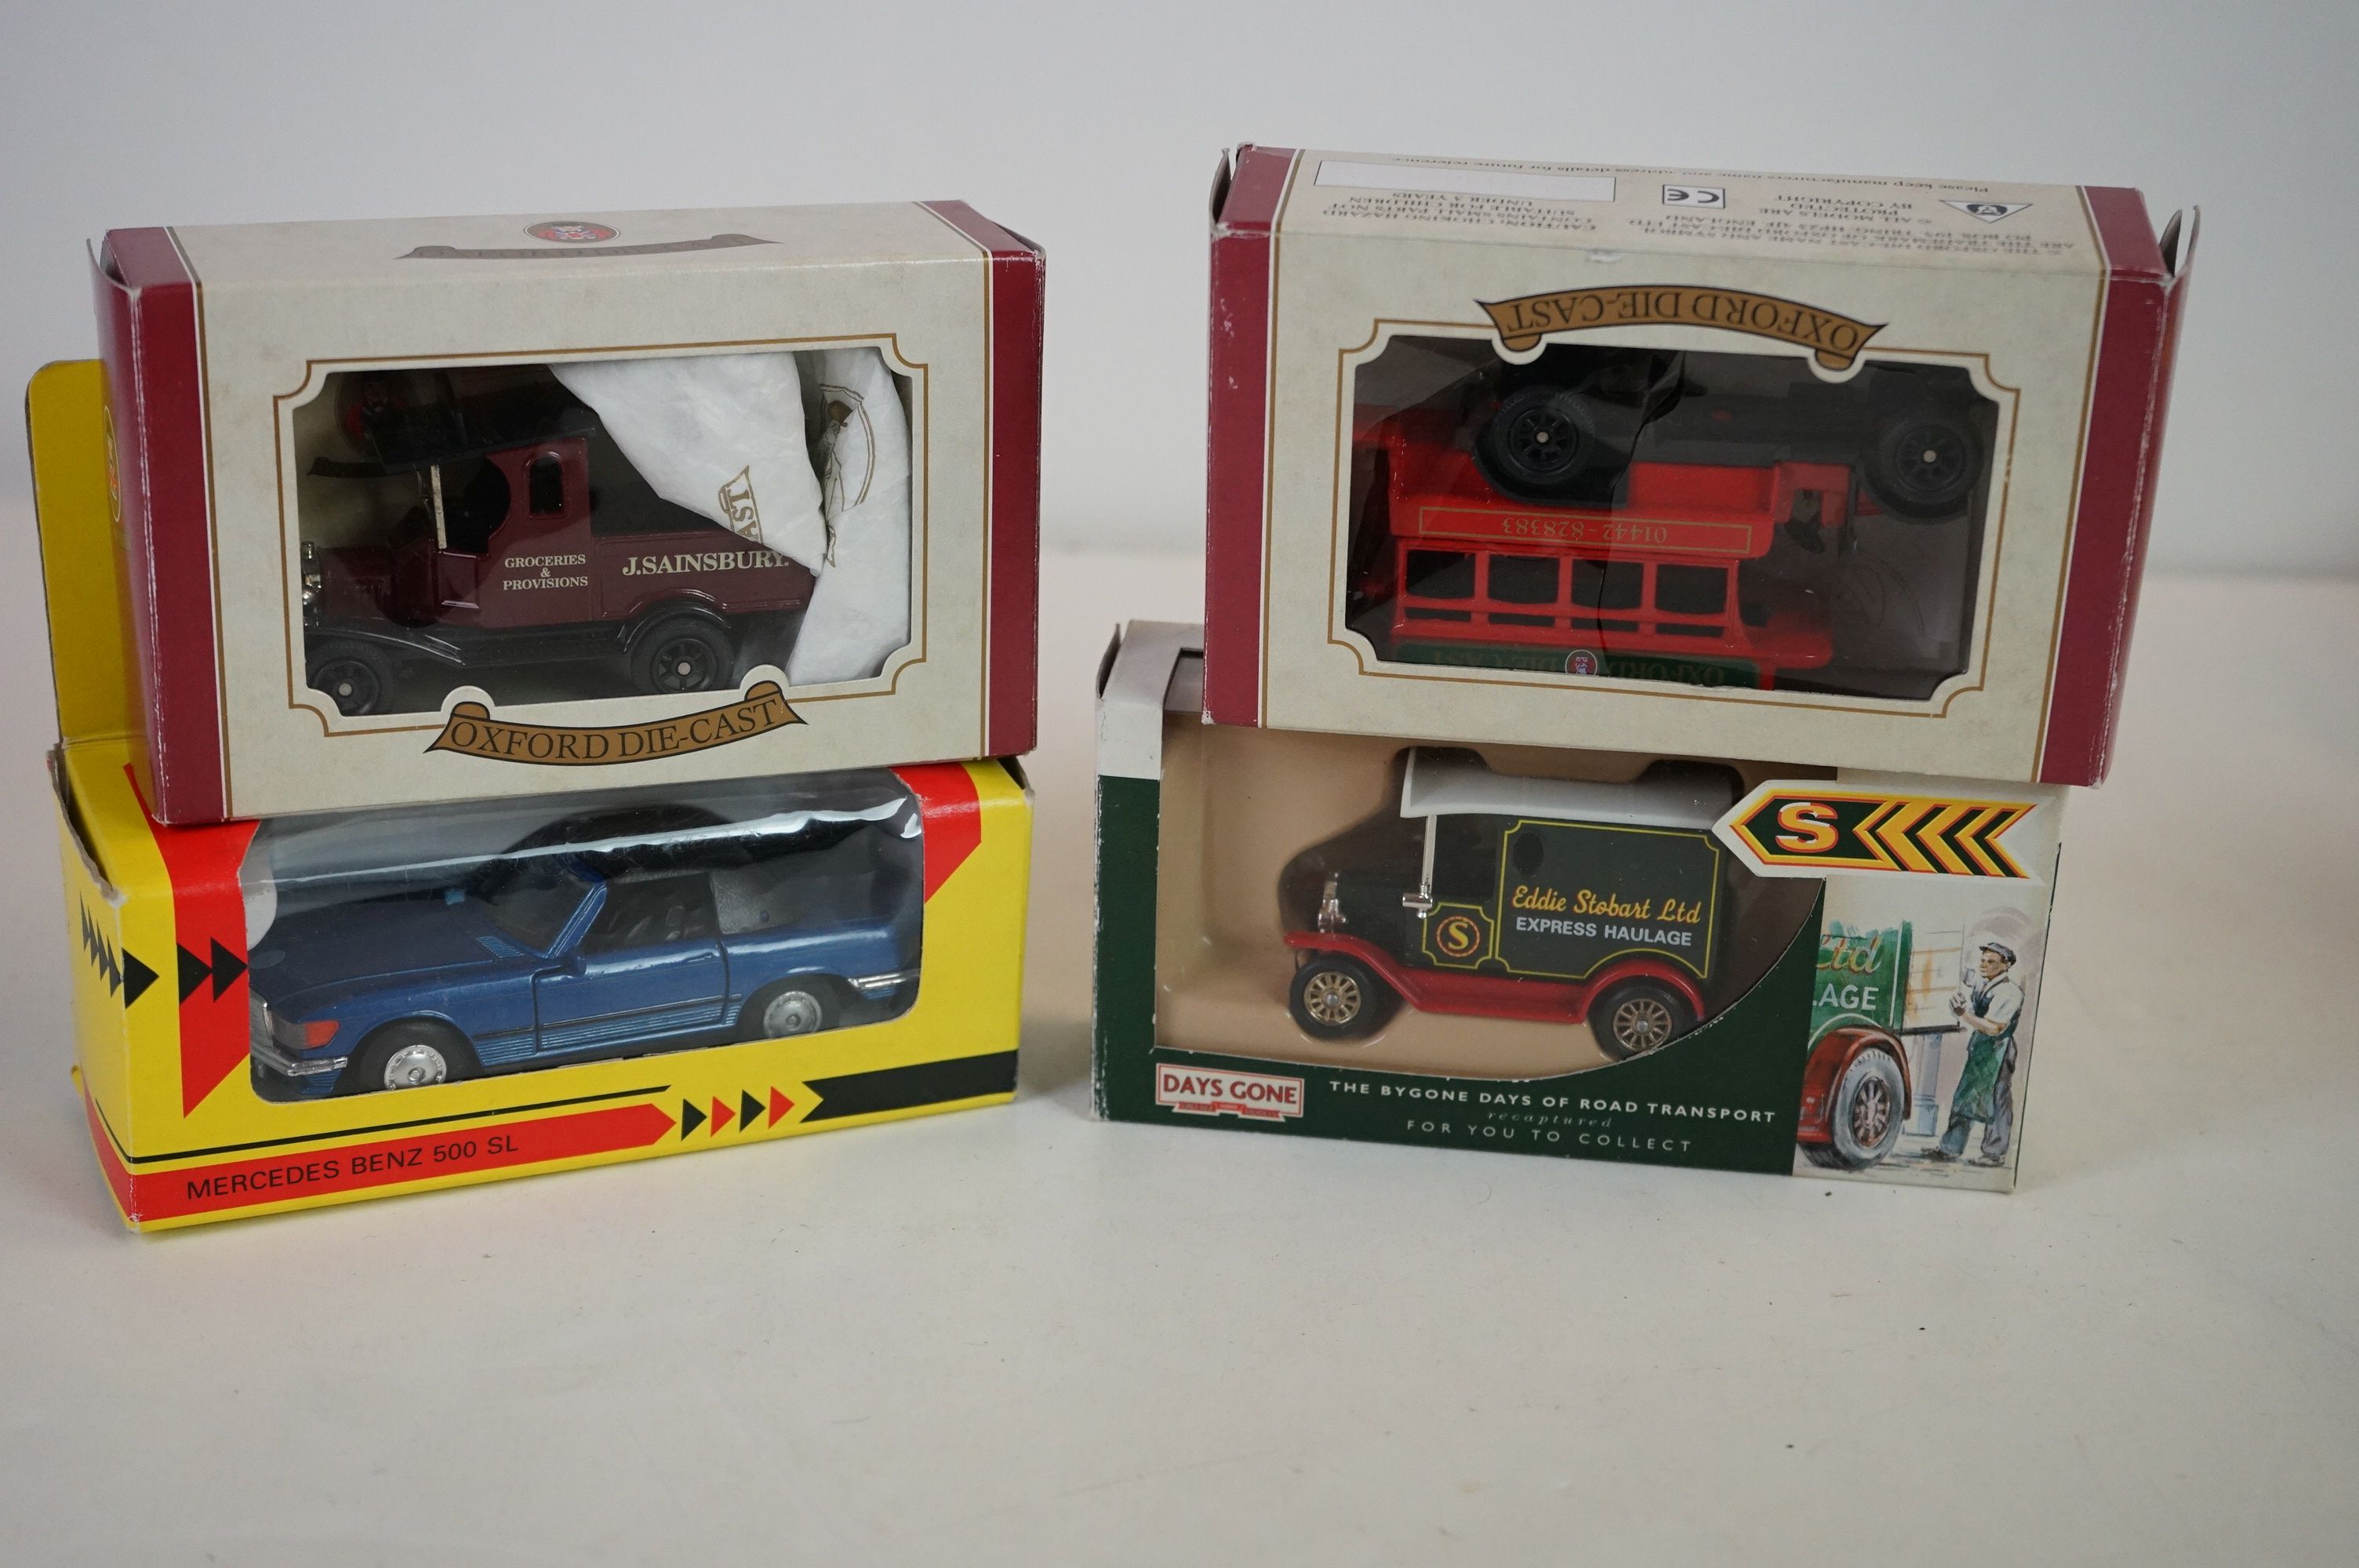 50 x Boxed diecast models to include Matchbox, Lledo, Oxford Diecast, Maisto, etc. Plus 30 x - Image 10 of 15